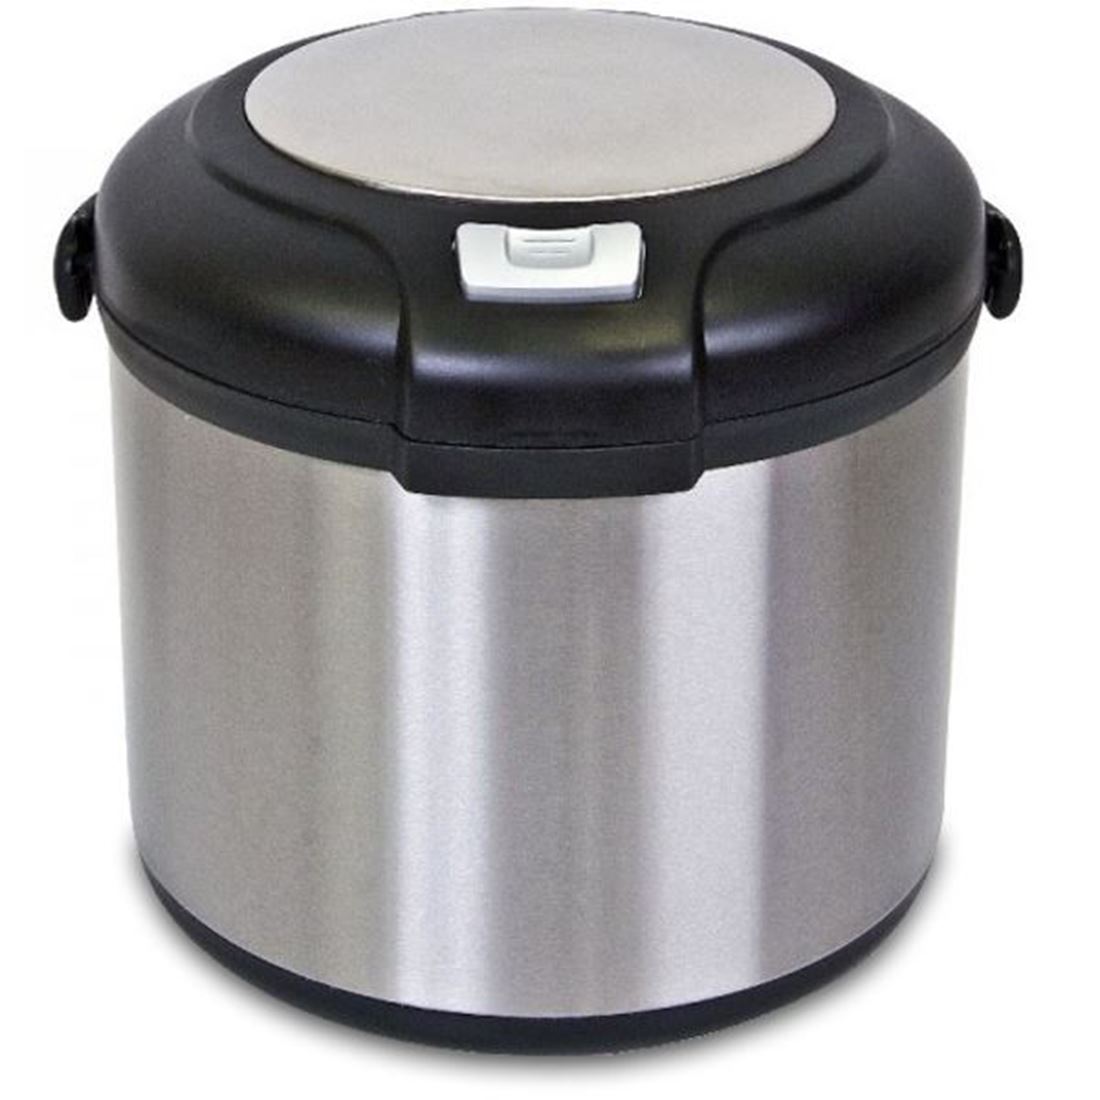 travel chef thermal cooker